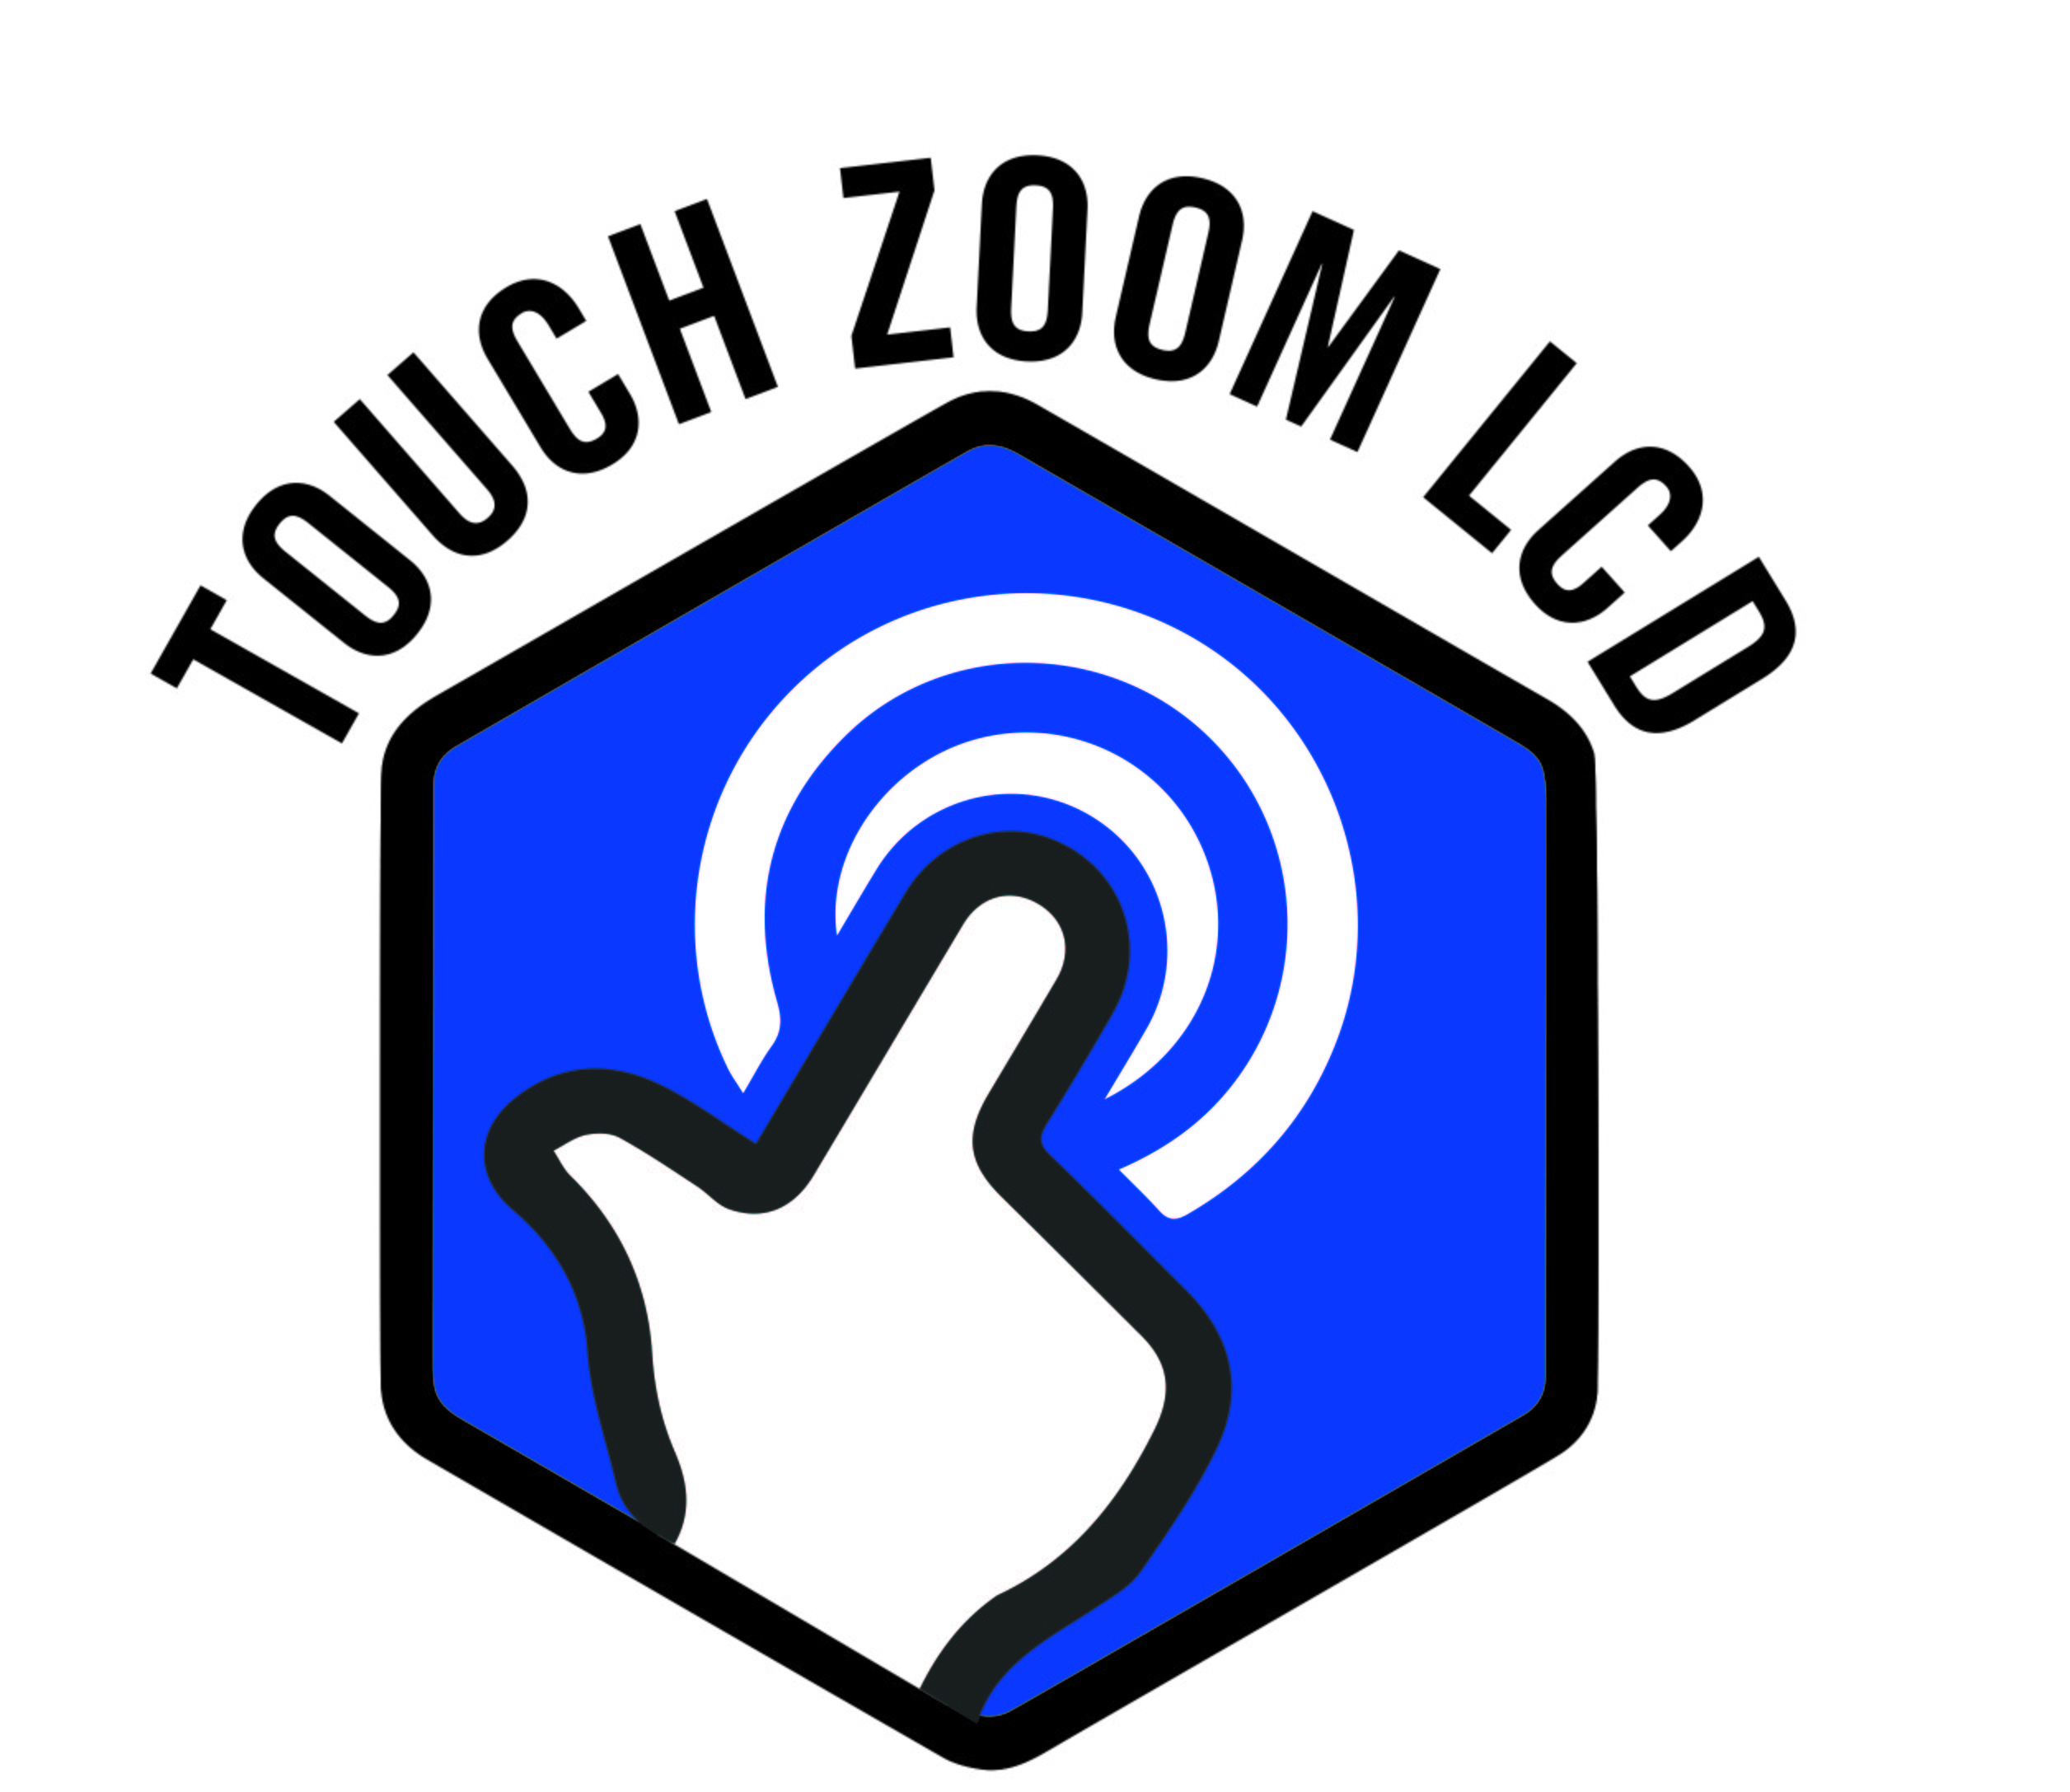 TouchZoom